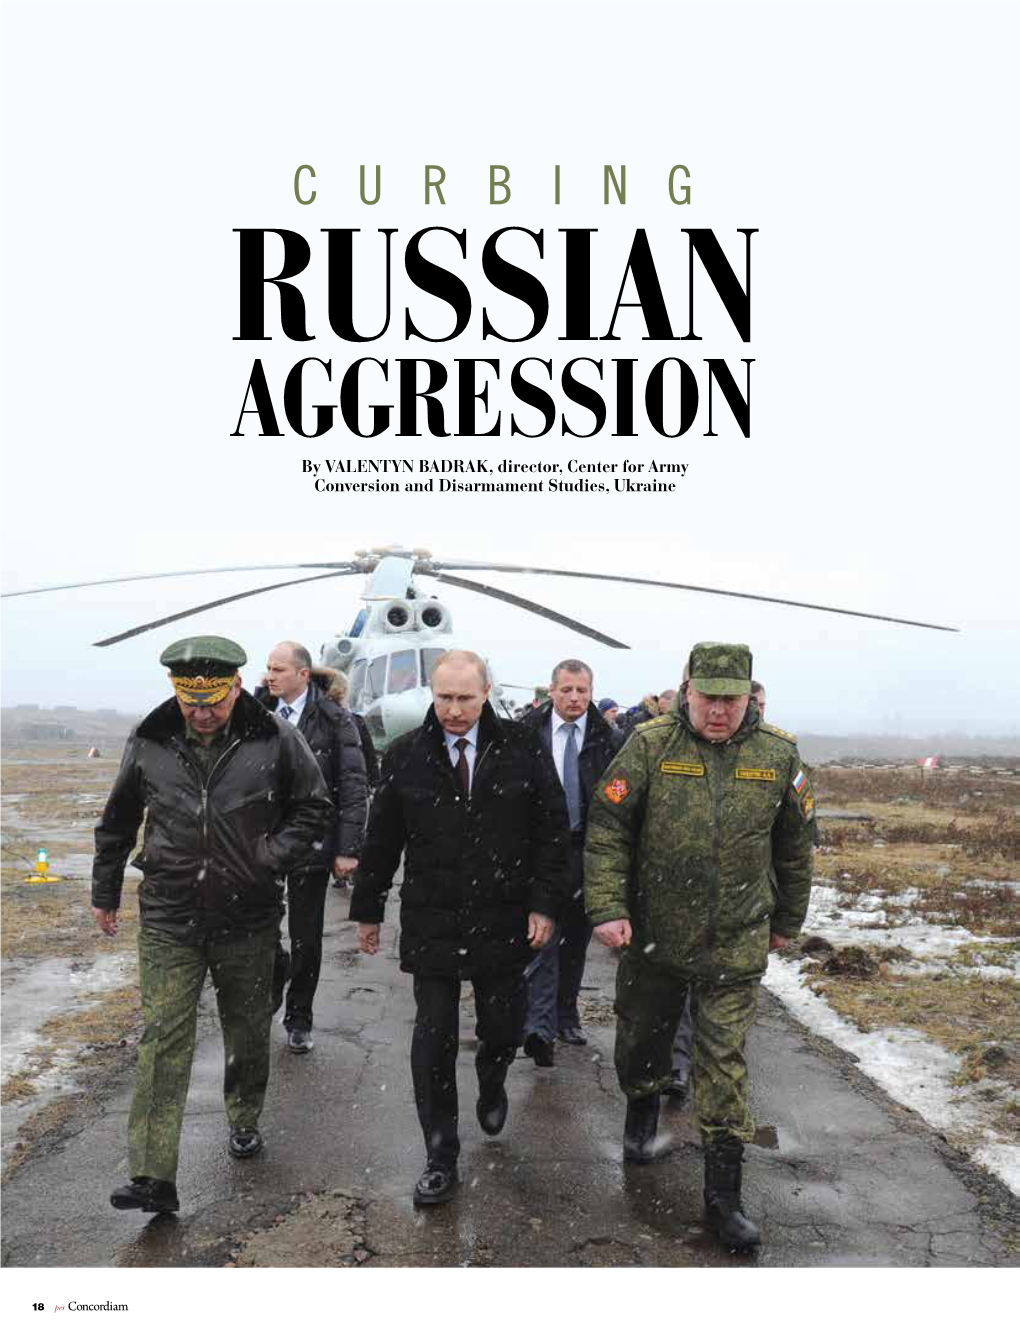 AGGRESSION by VALENTYN BADRAK, Director, Center for Army Conversion and Disarmament Studies, Ukraine